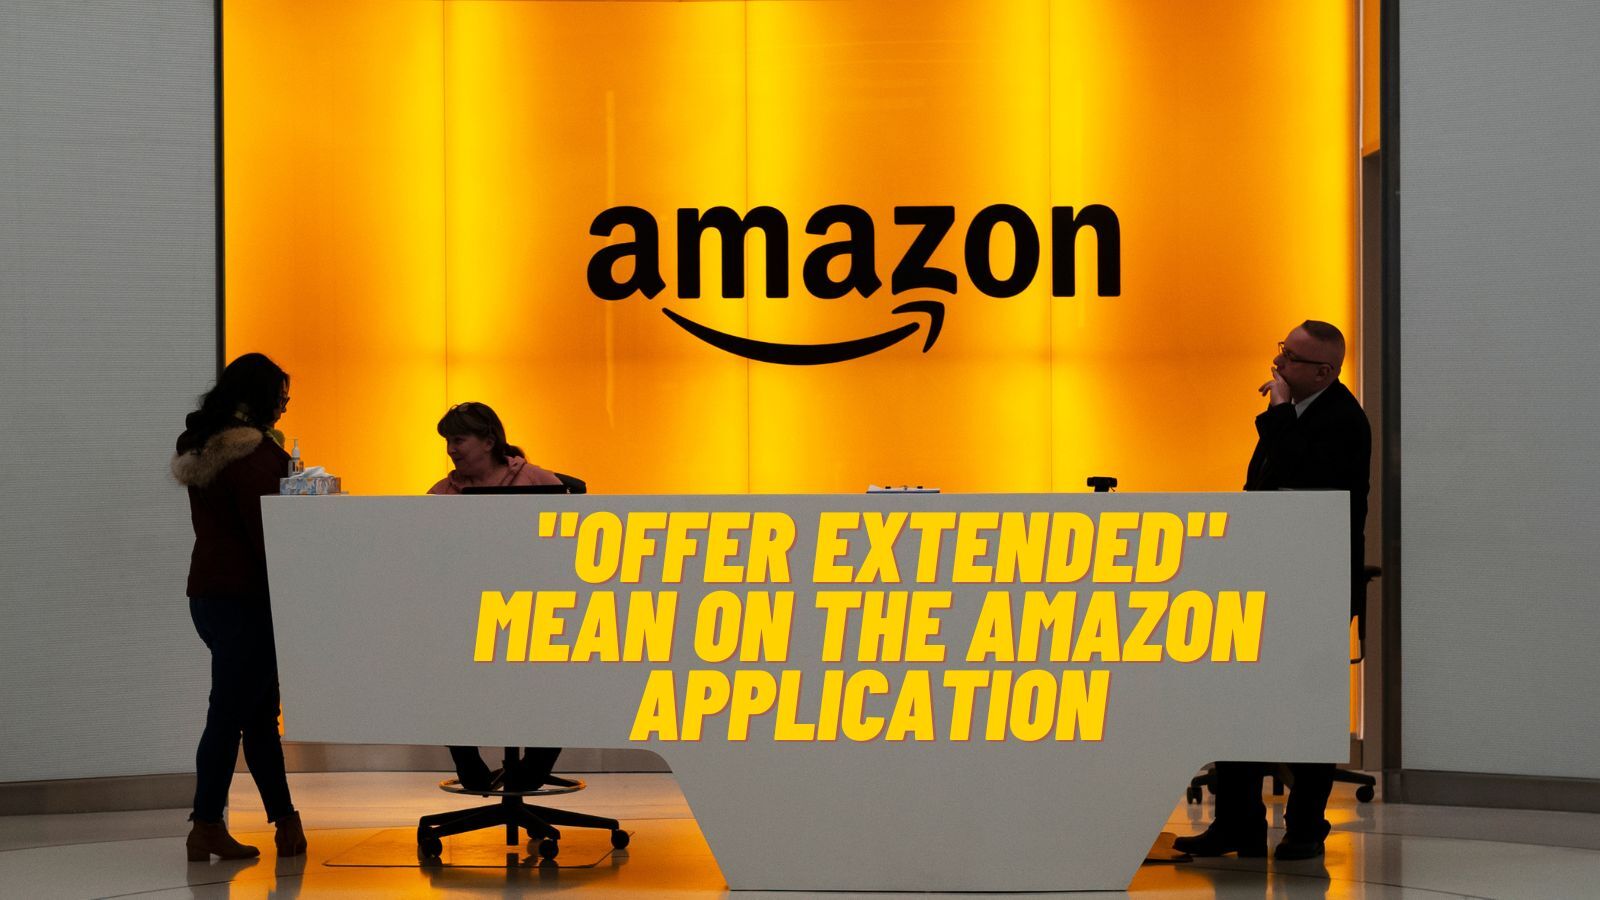 What Does "Offer Extended" Mean on The Amazon Application?